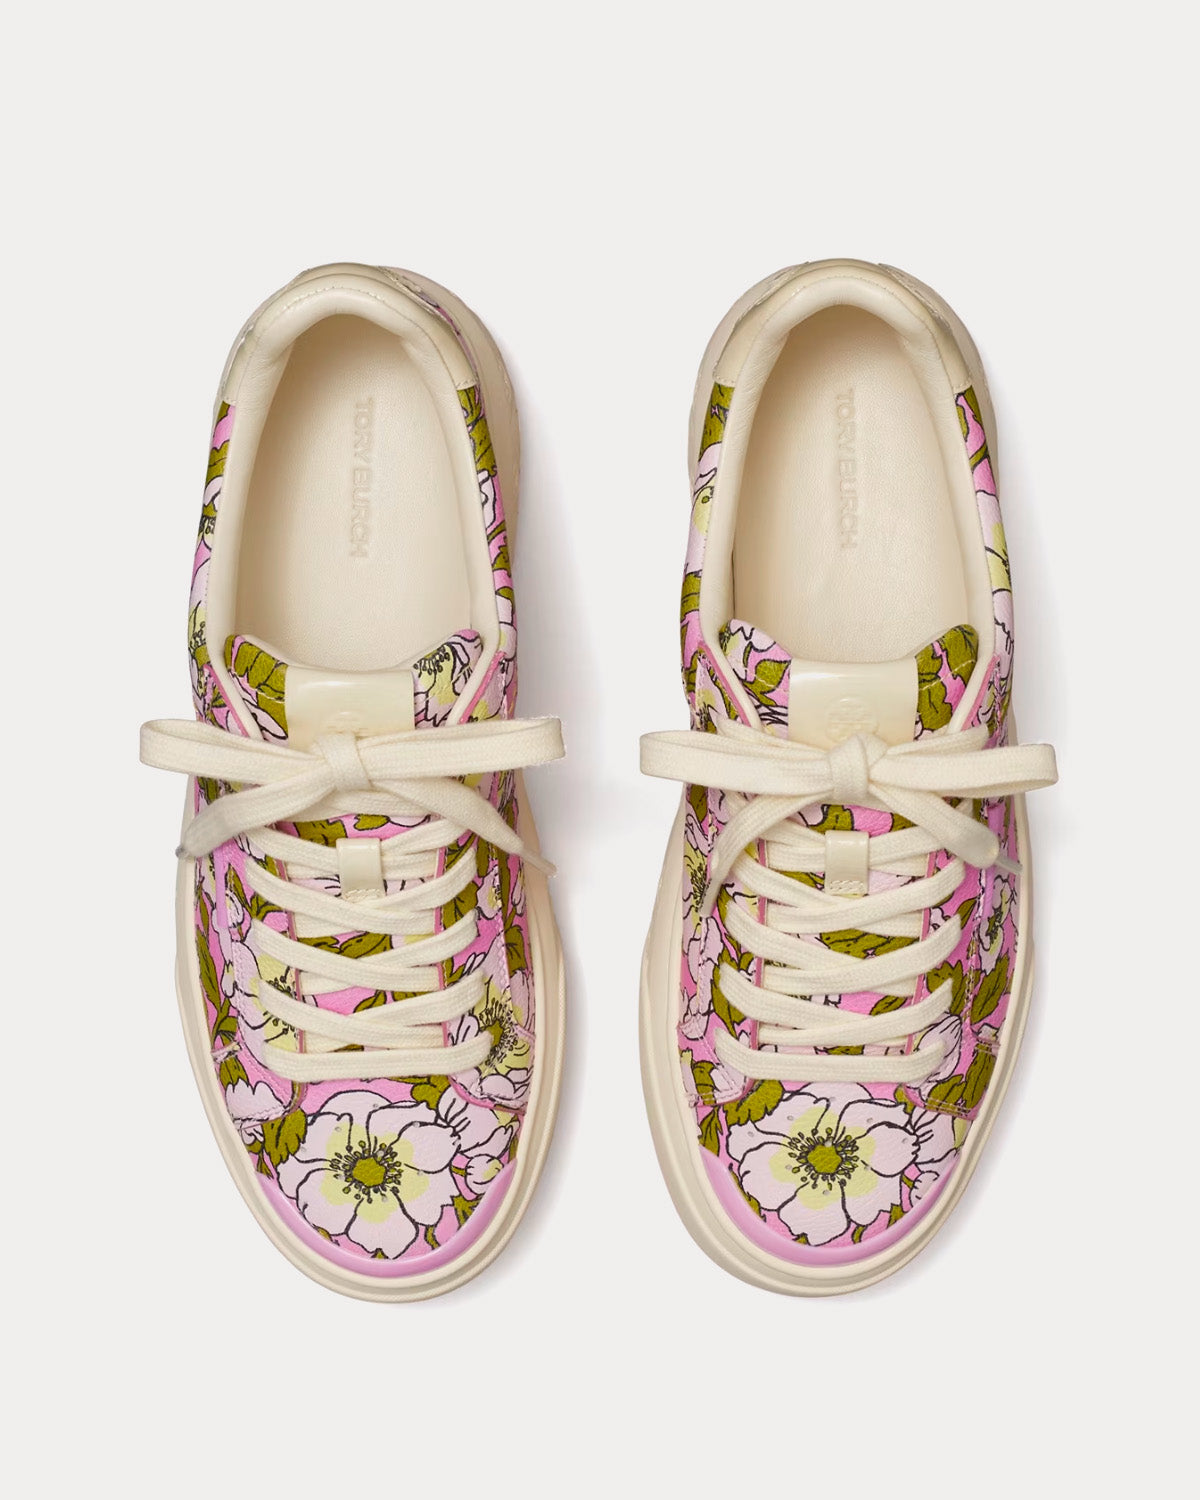 Tory Burch - Ladybug Purple Bold Flowers / Oyster Low Top Sneakers